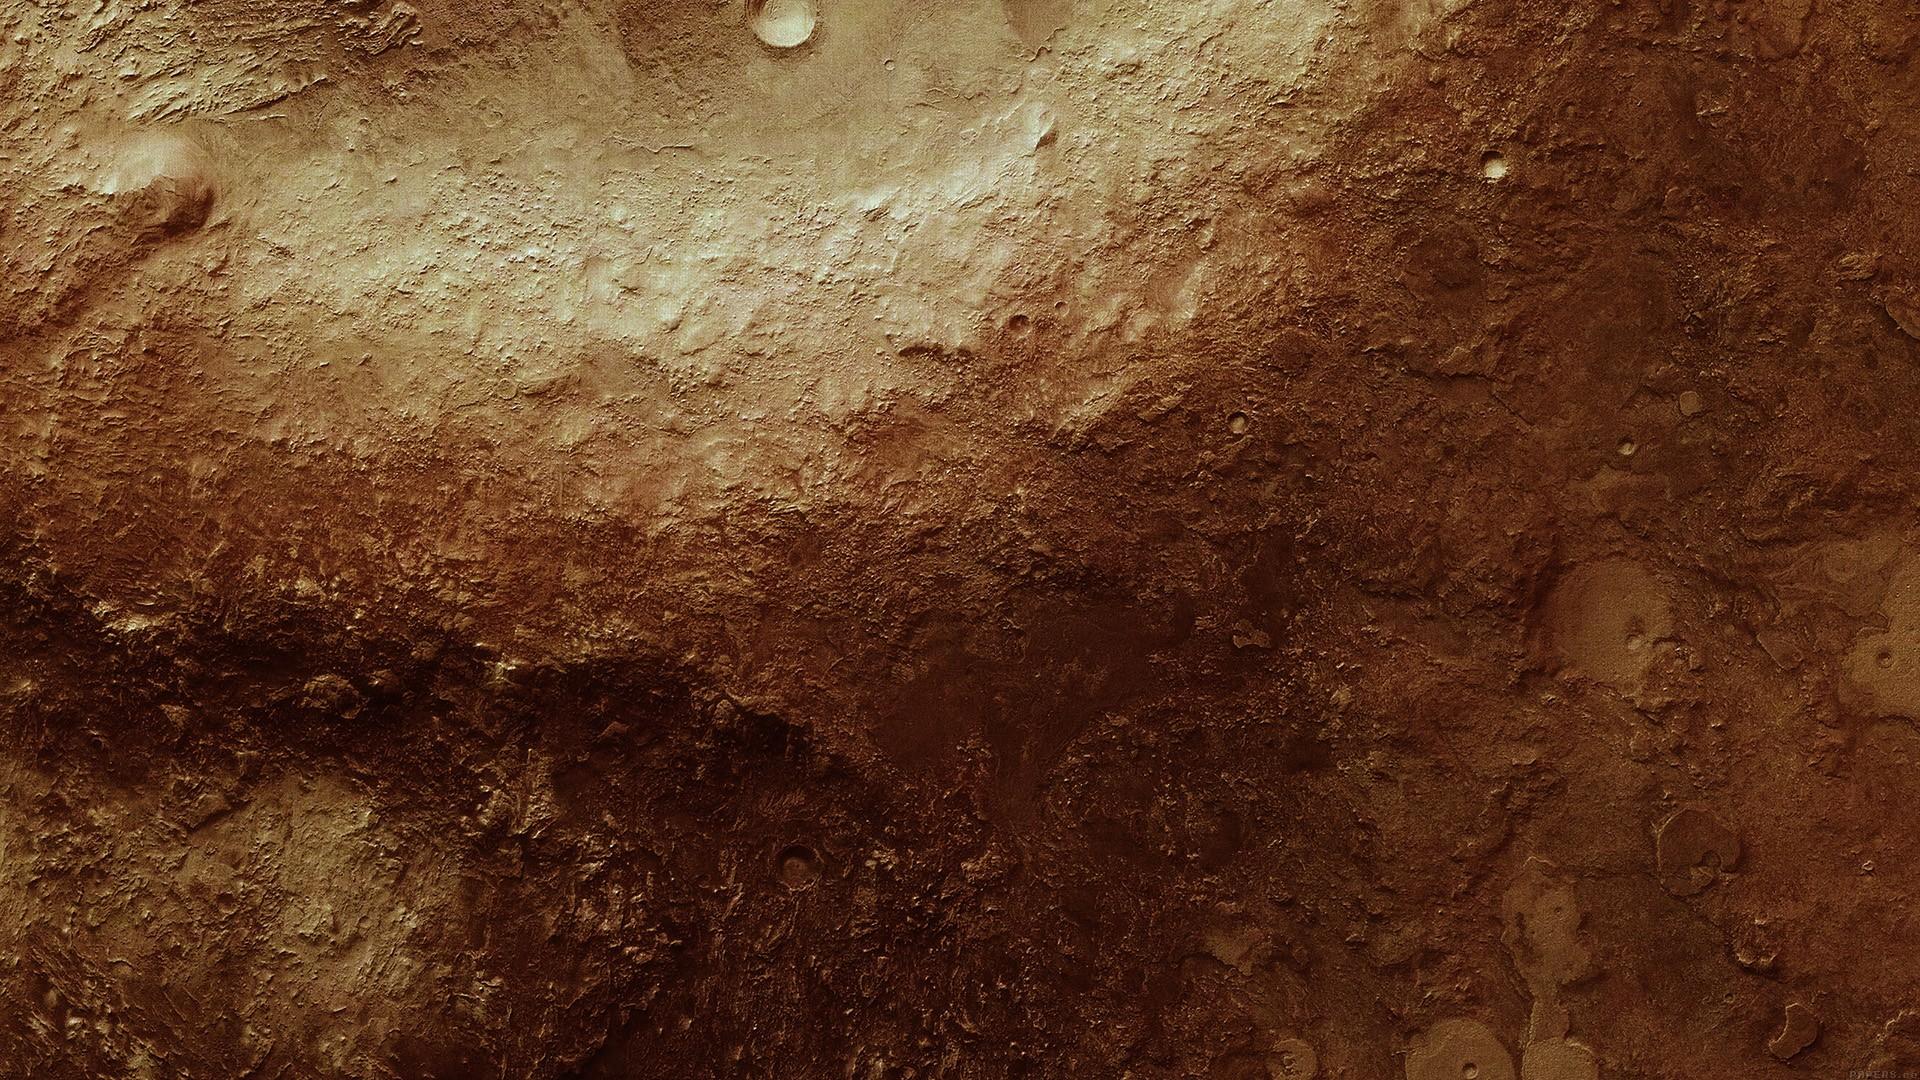 brown, #space, #asteroid, #texture, #crater wallpaper